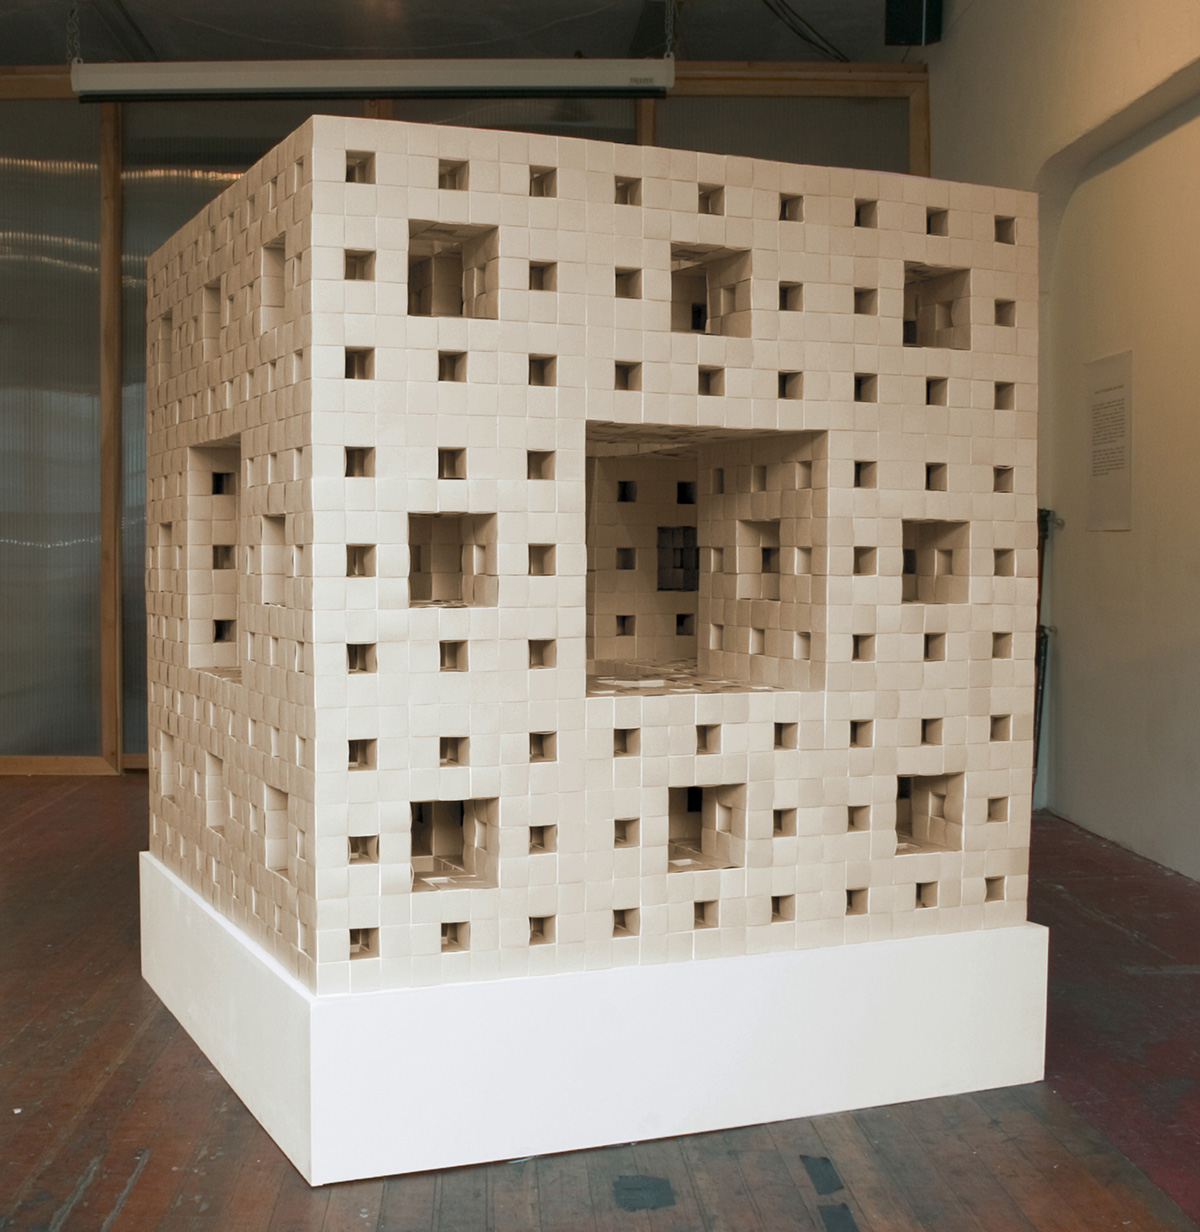 Jeannine Mosely’s large scale model of a level three Menger Sponge. 